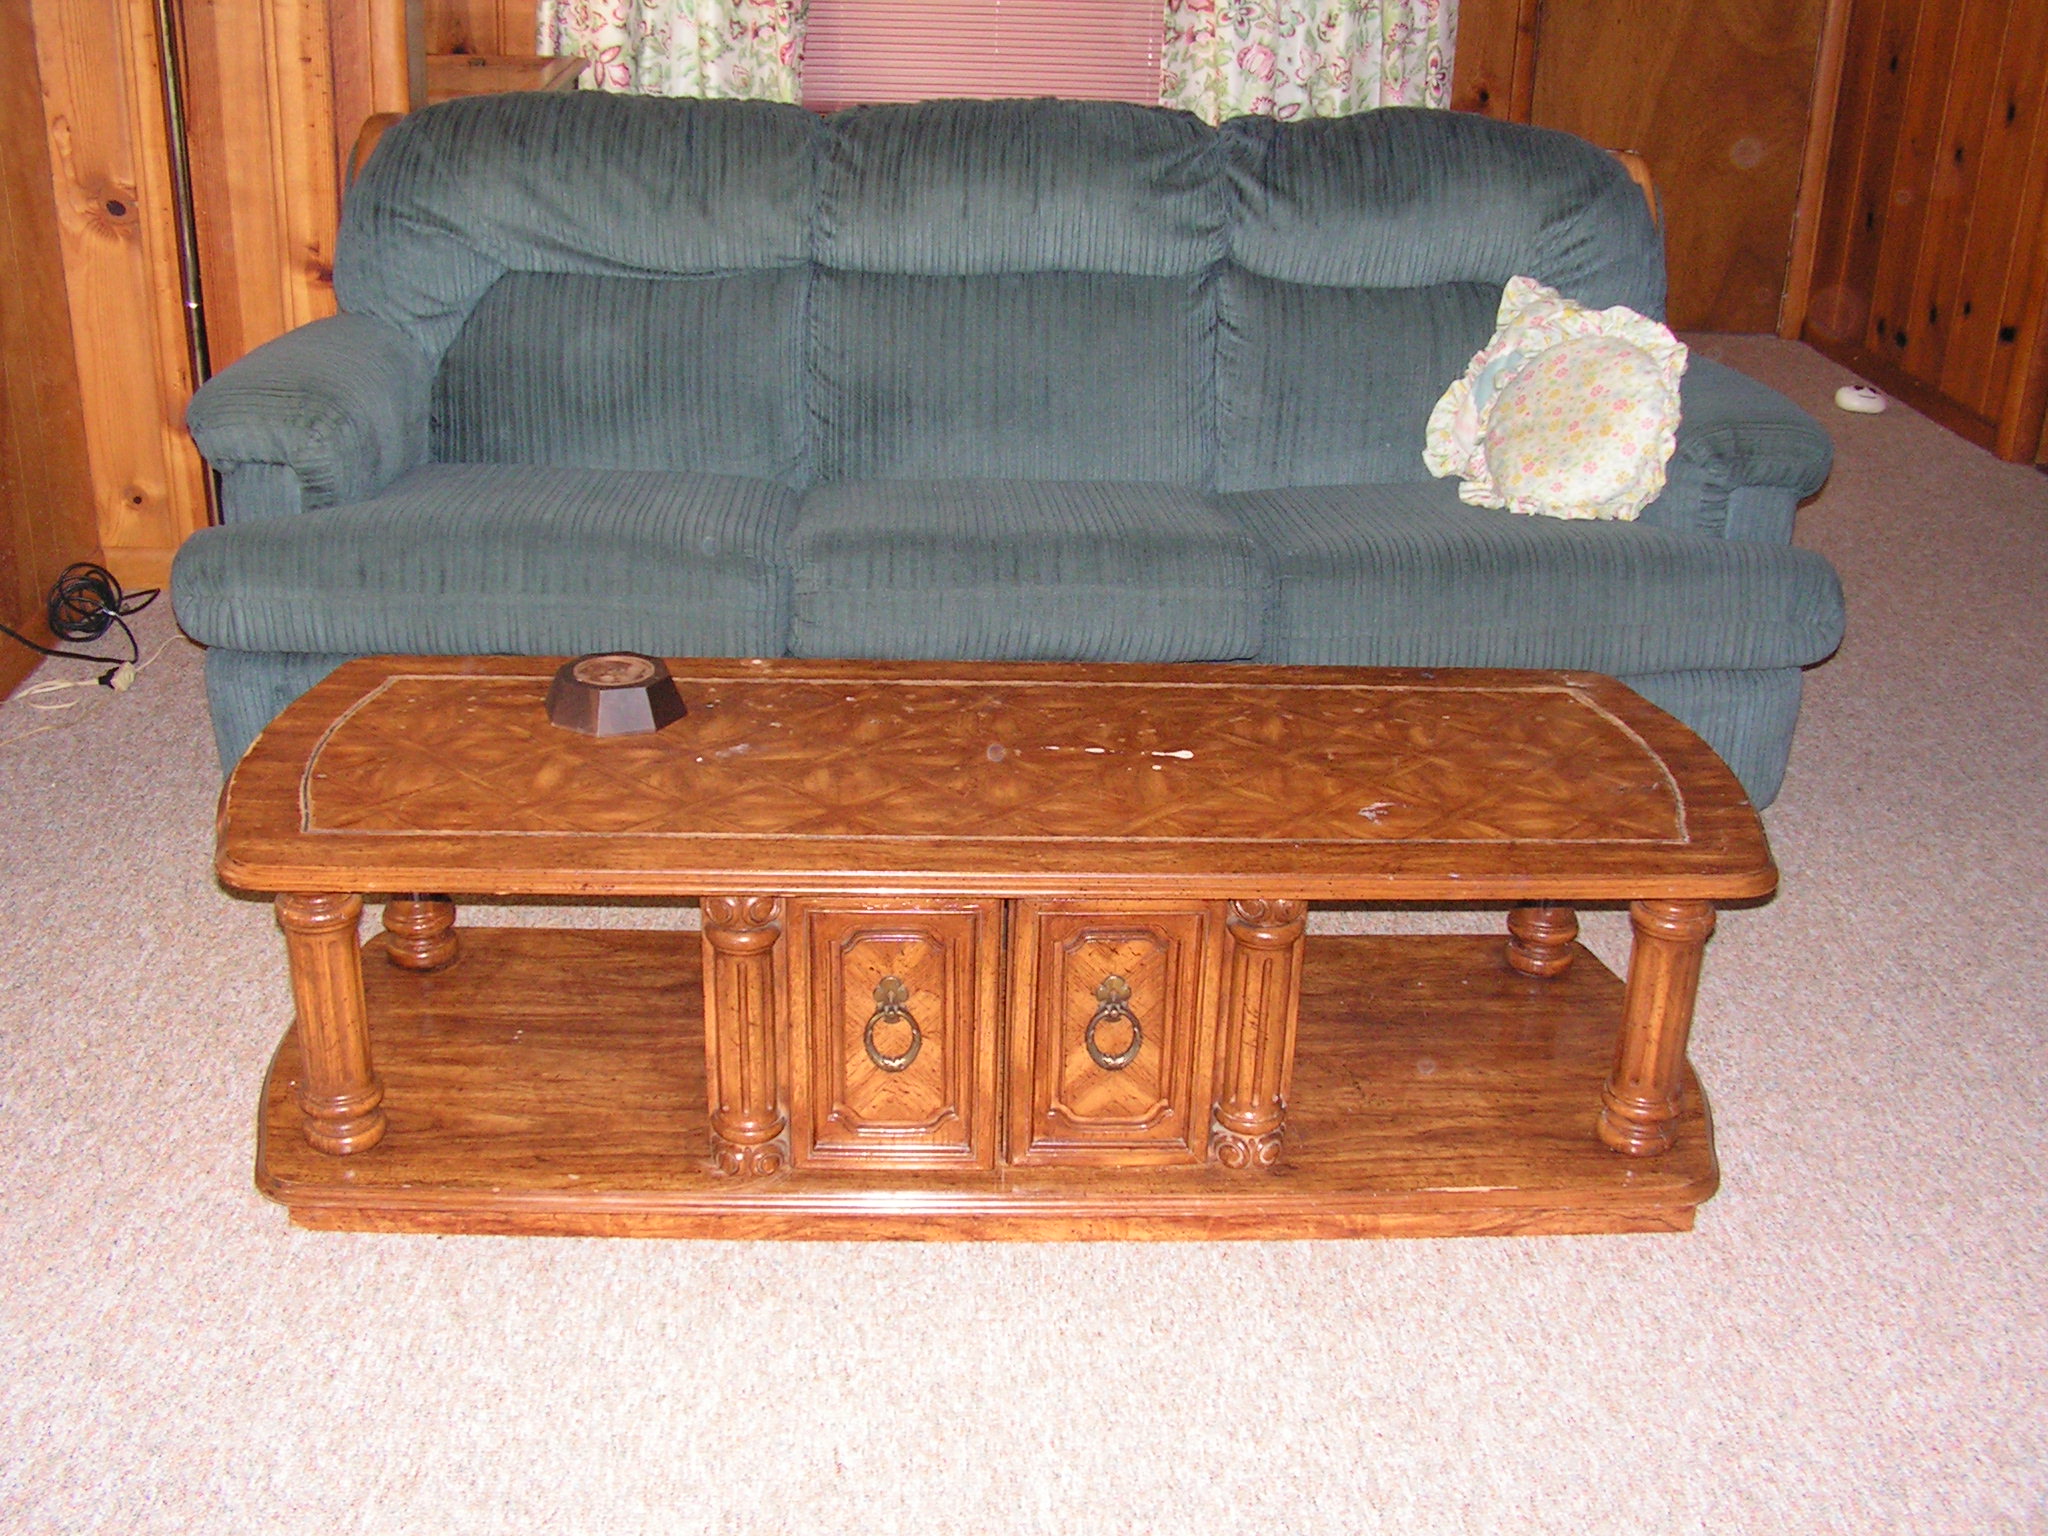 ! Coffee Table - FREE with Couch (pictured), Chair & Ottoman set